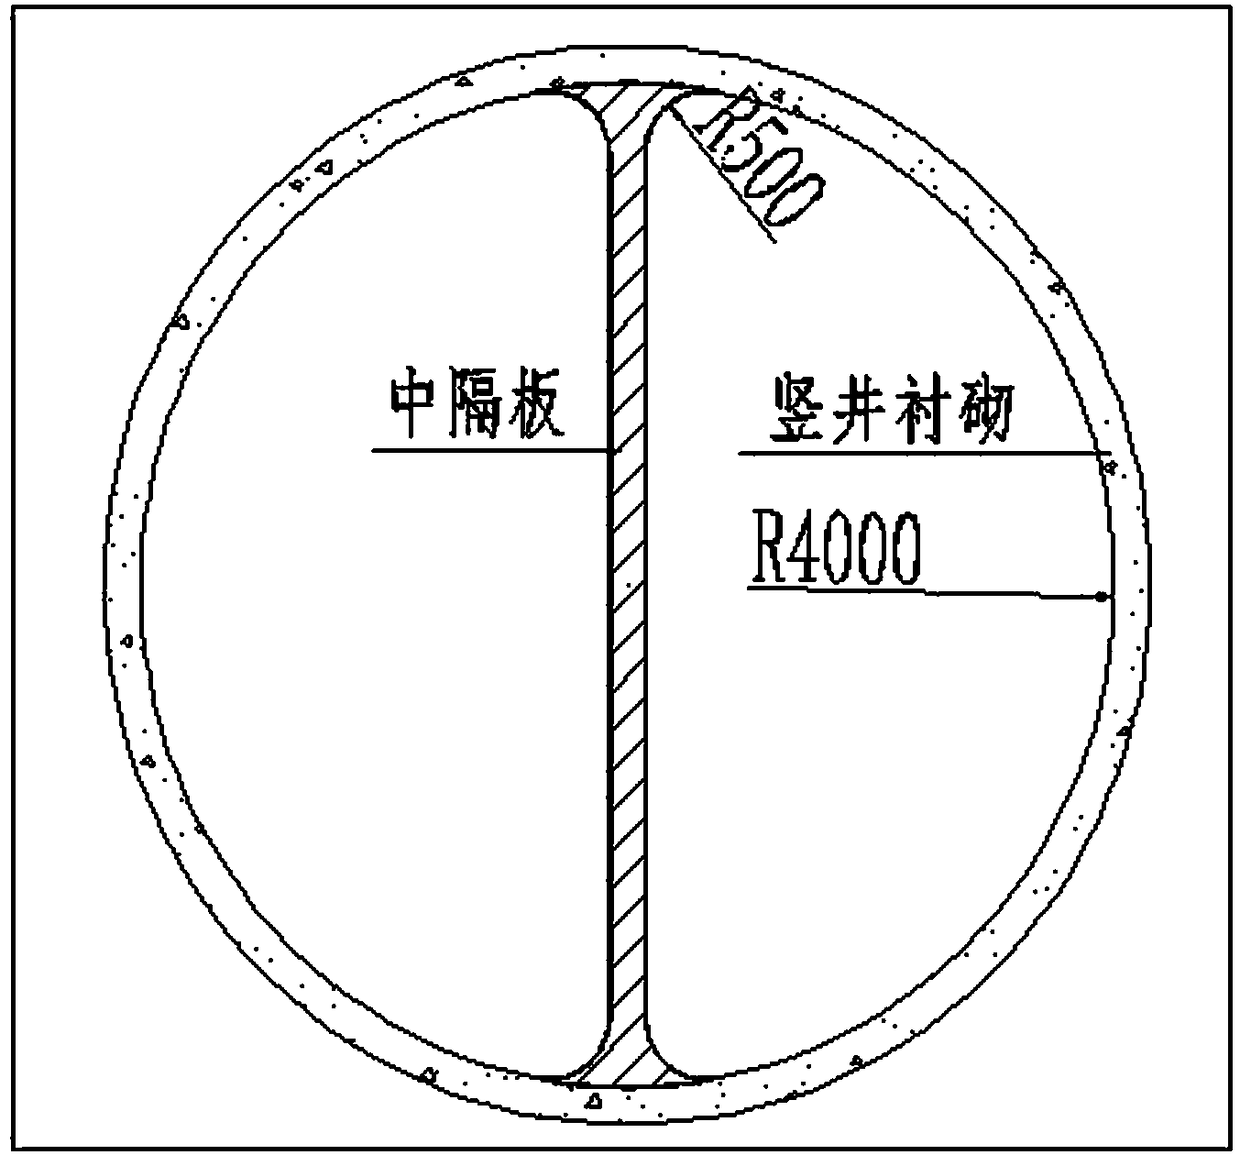 Tunnel ventilation vertical shaft wellbore construction device and method